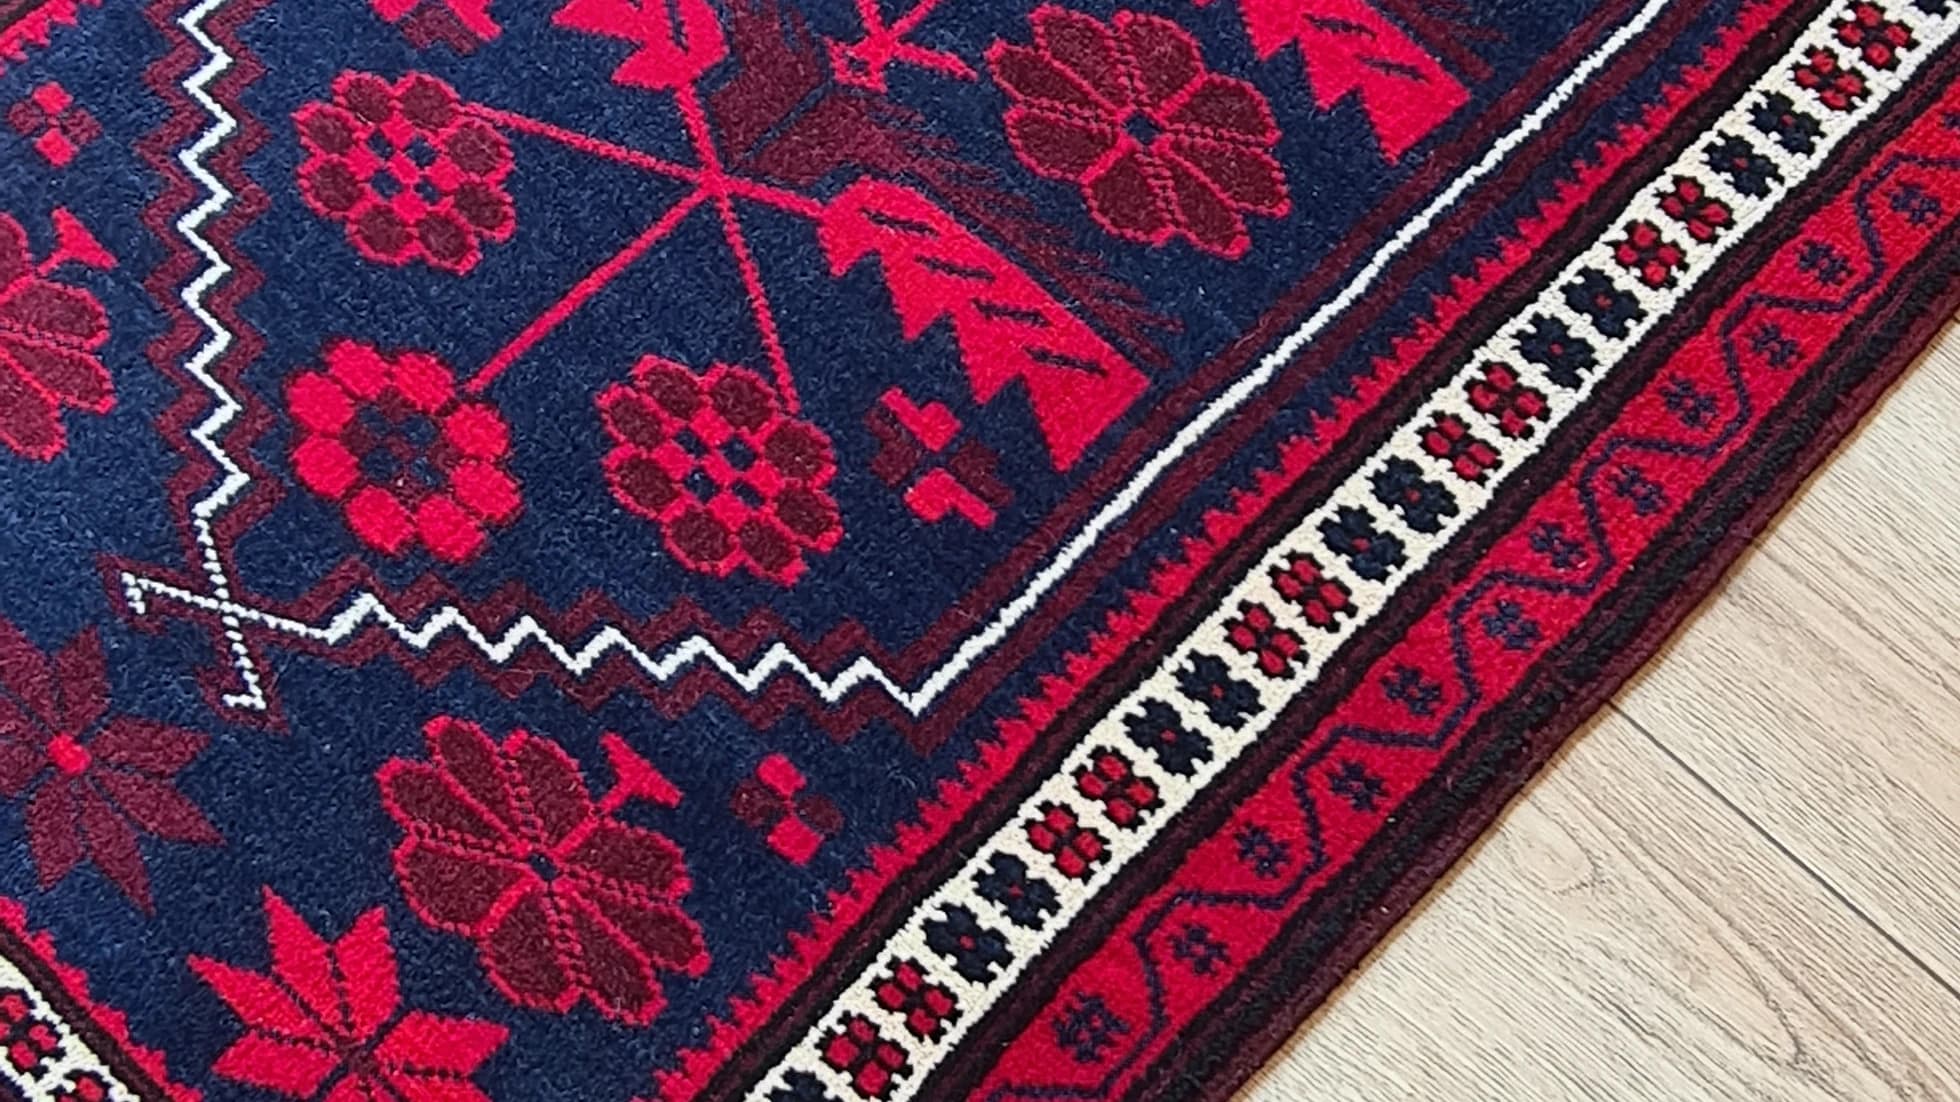 vintage balikesir yagcibedir floral carpet in red and navy hues inside our rug store in NYC